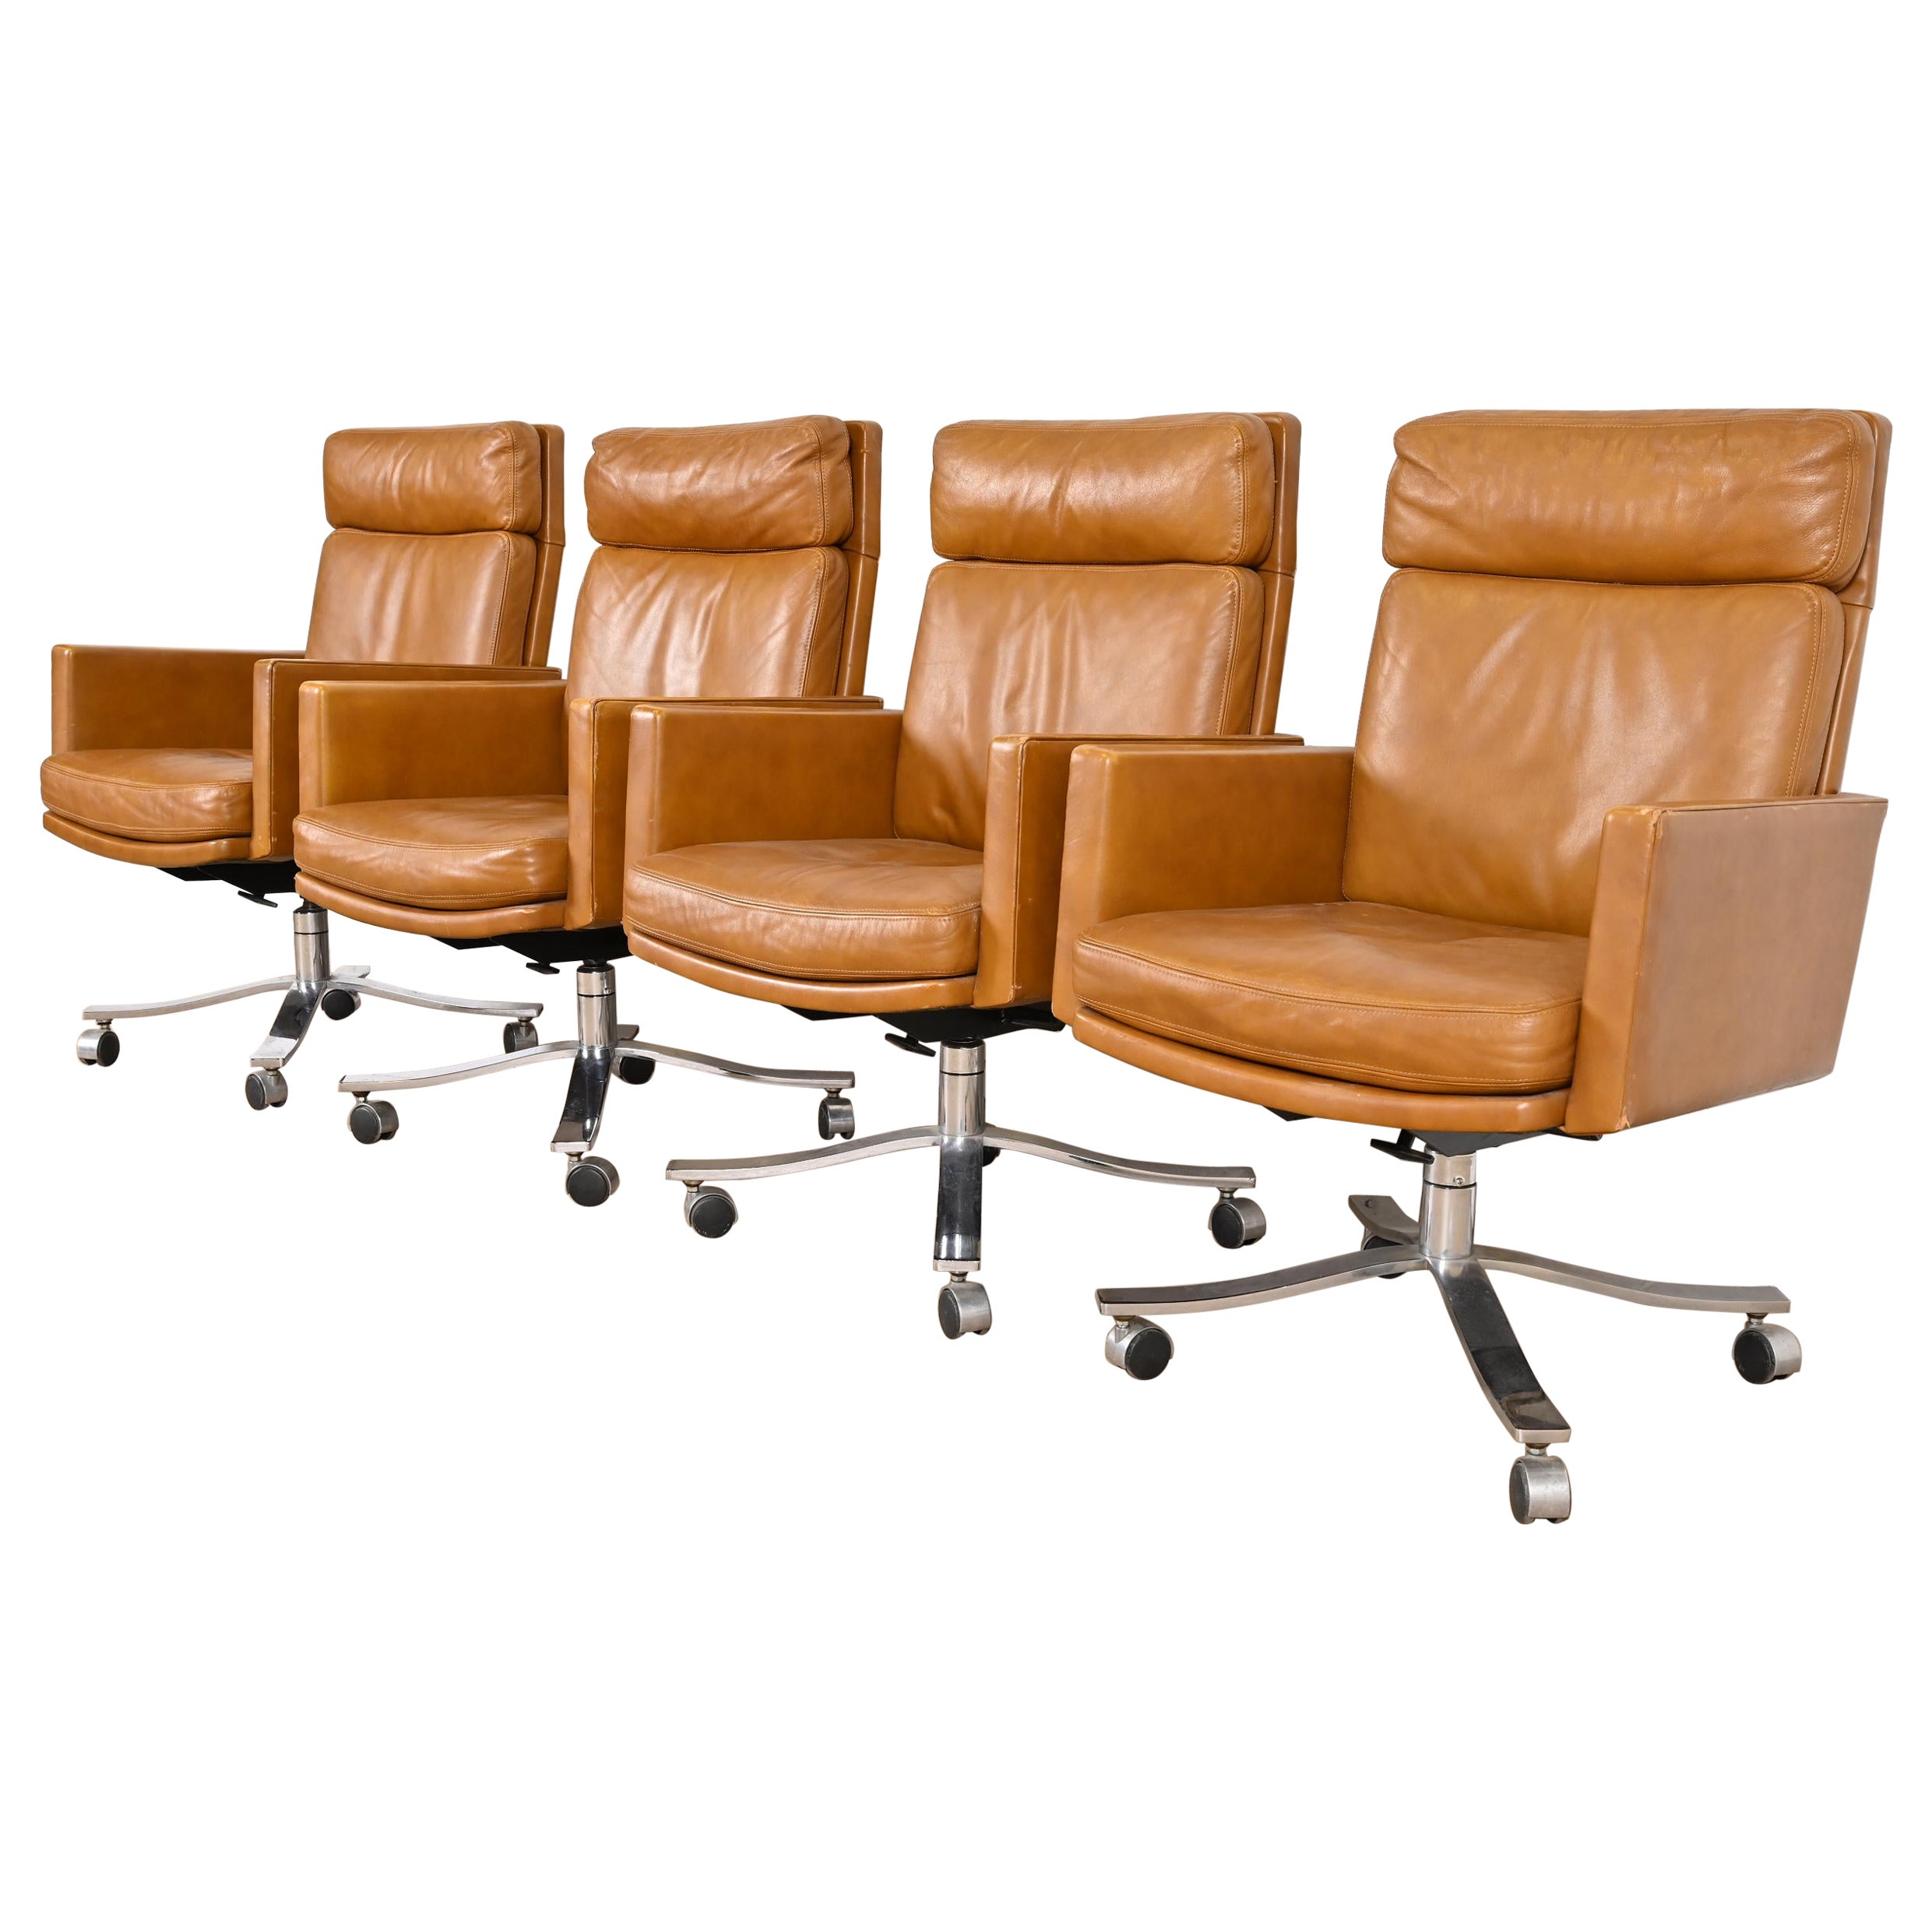 Stow Davis Mid-Century Modern Leather Executive Swivel Desk Chairs, Set of Four For Sale